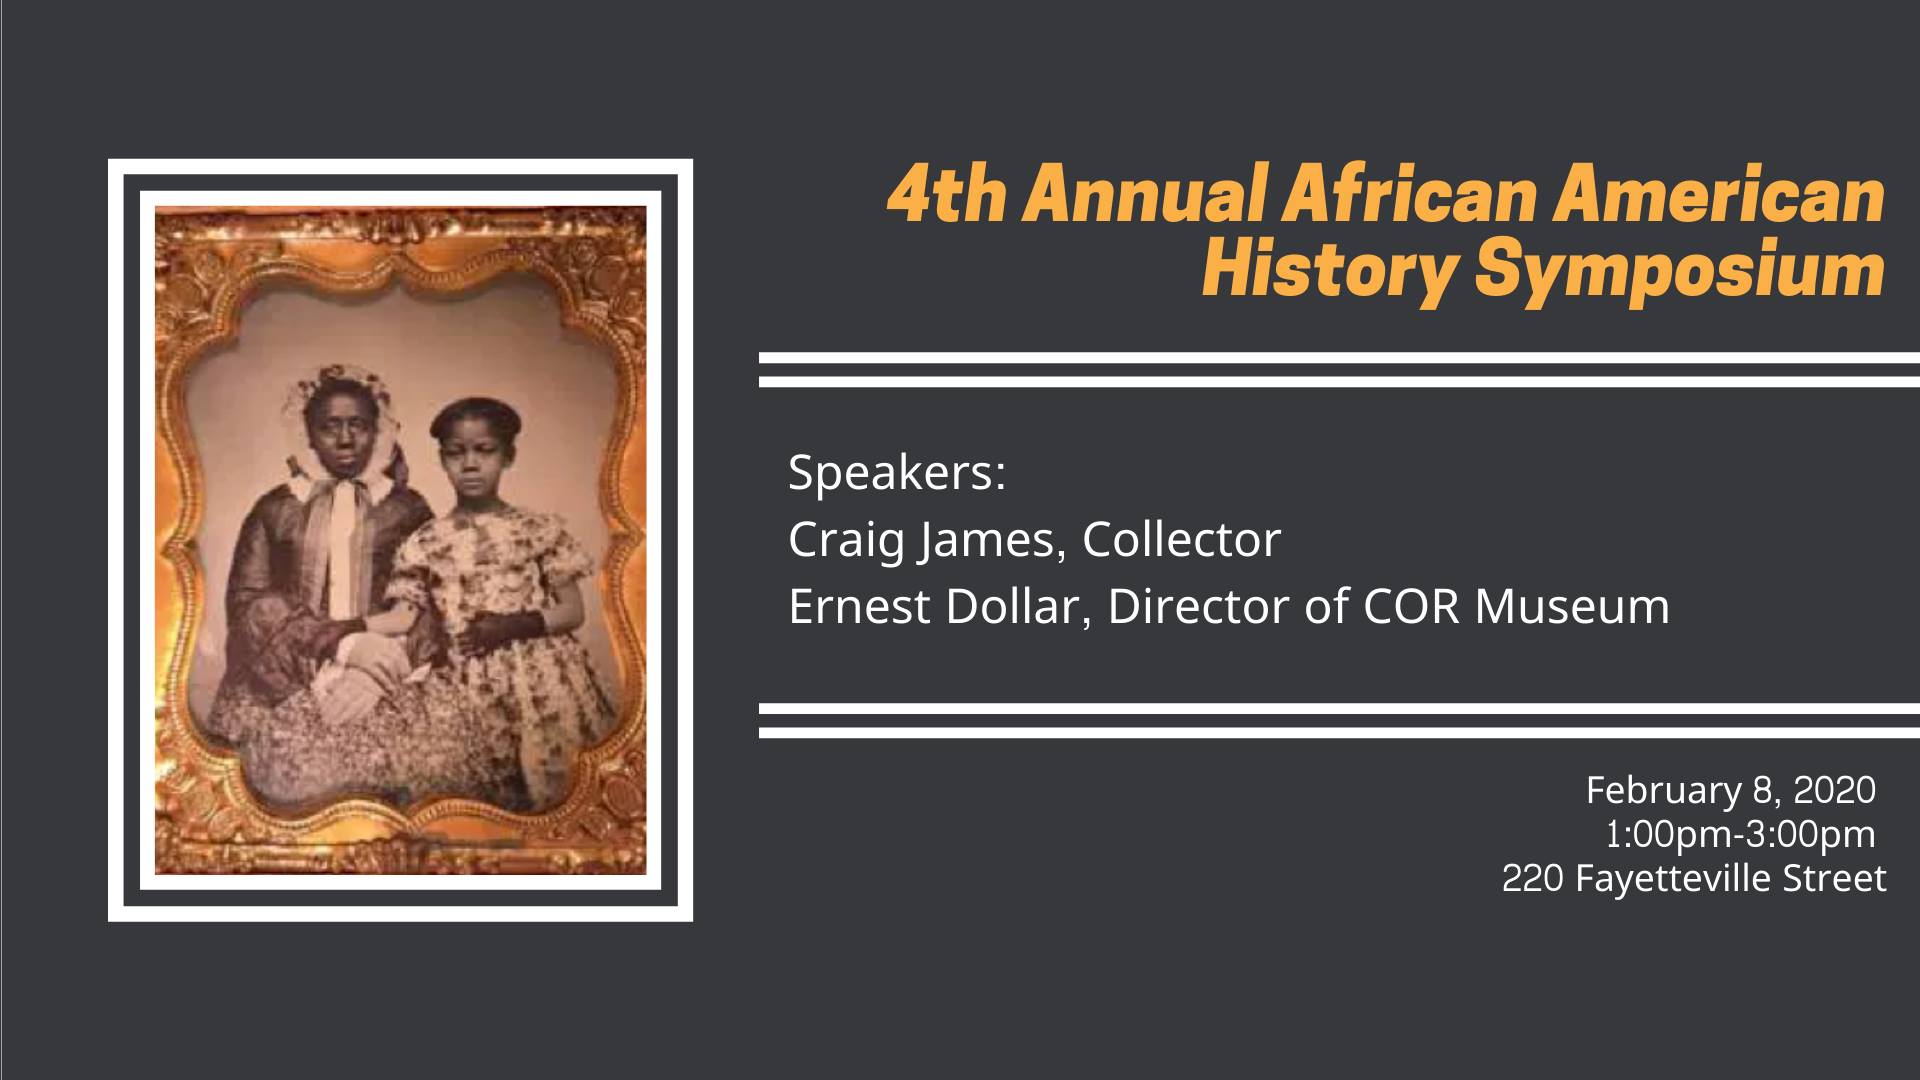 African American Symposium banner including a 19th century photo of two African American women.